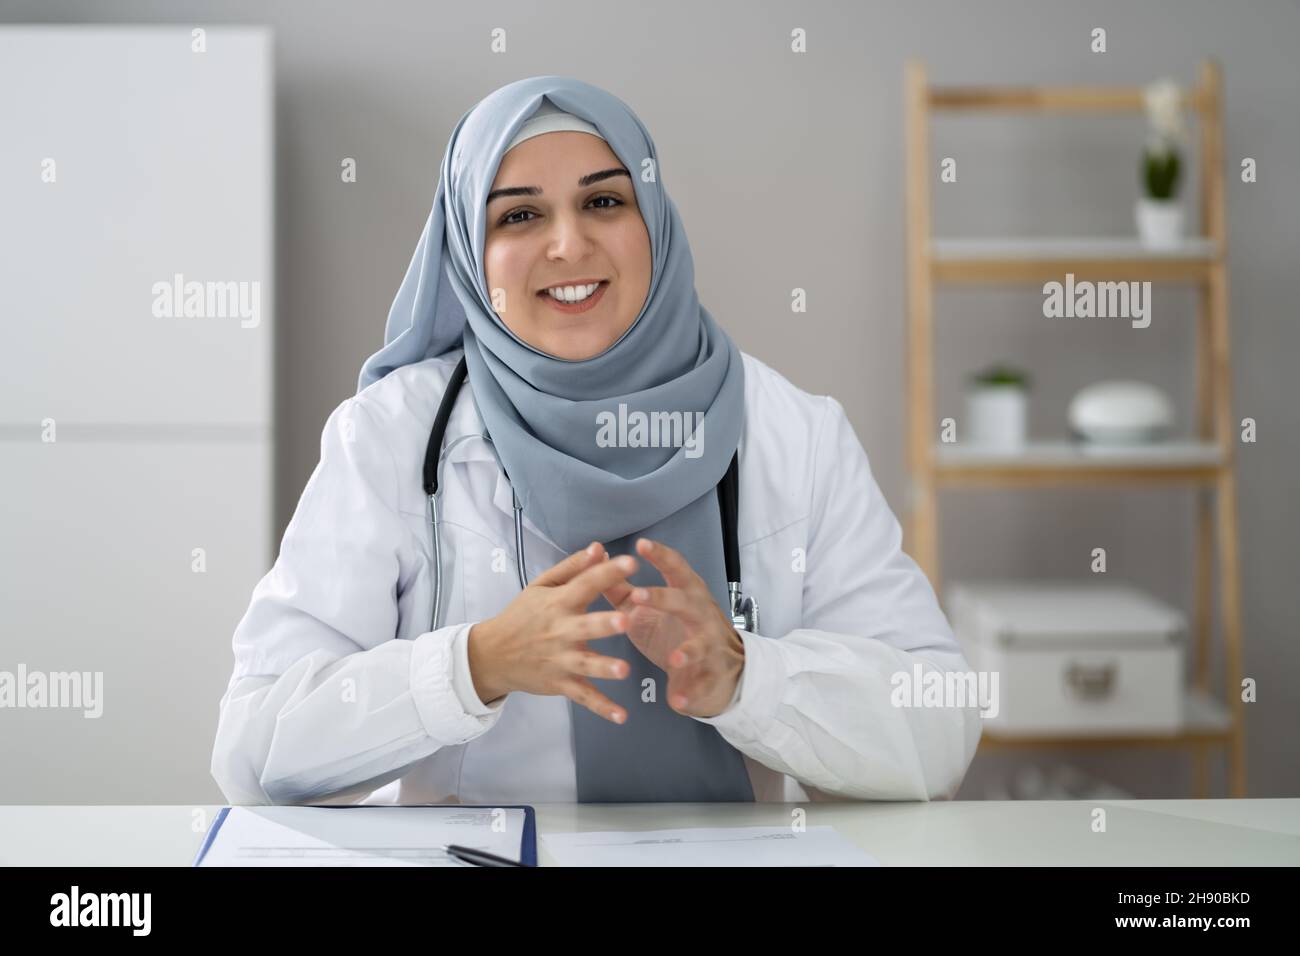 Muslim Woman Physician Doctor Video Conference Call Stock Photo